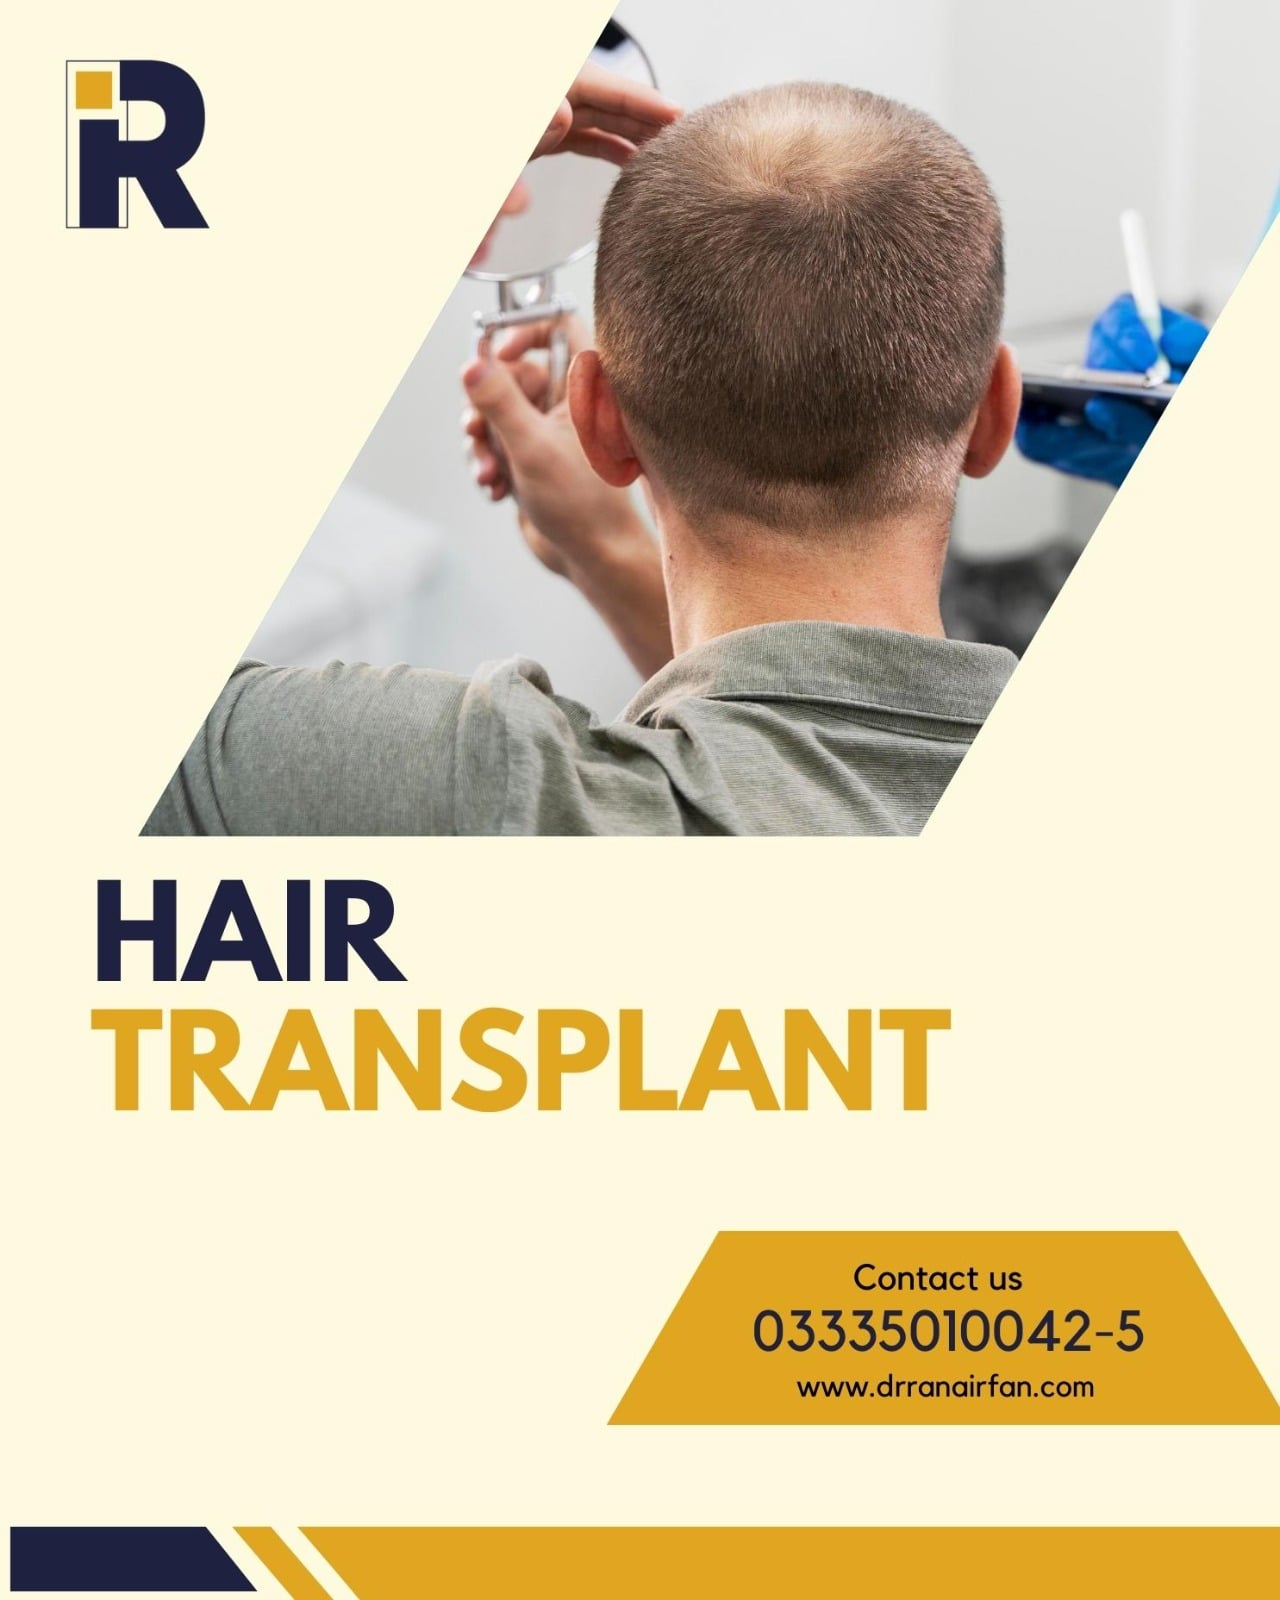 FUT and FUE hair transplant services in Islamabad PakistanHealth and BeautyClinicsCentral DelhiChandni Chowk